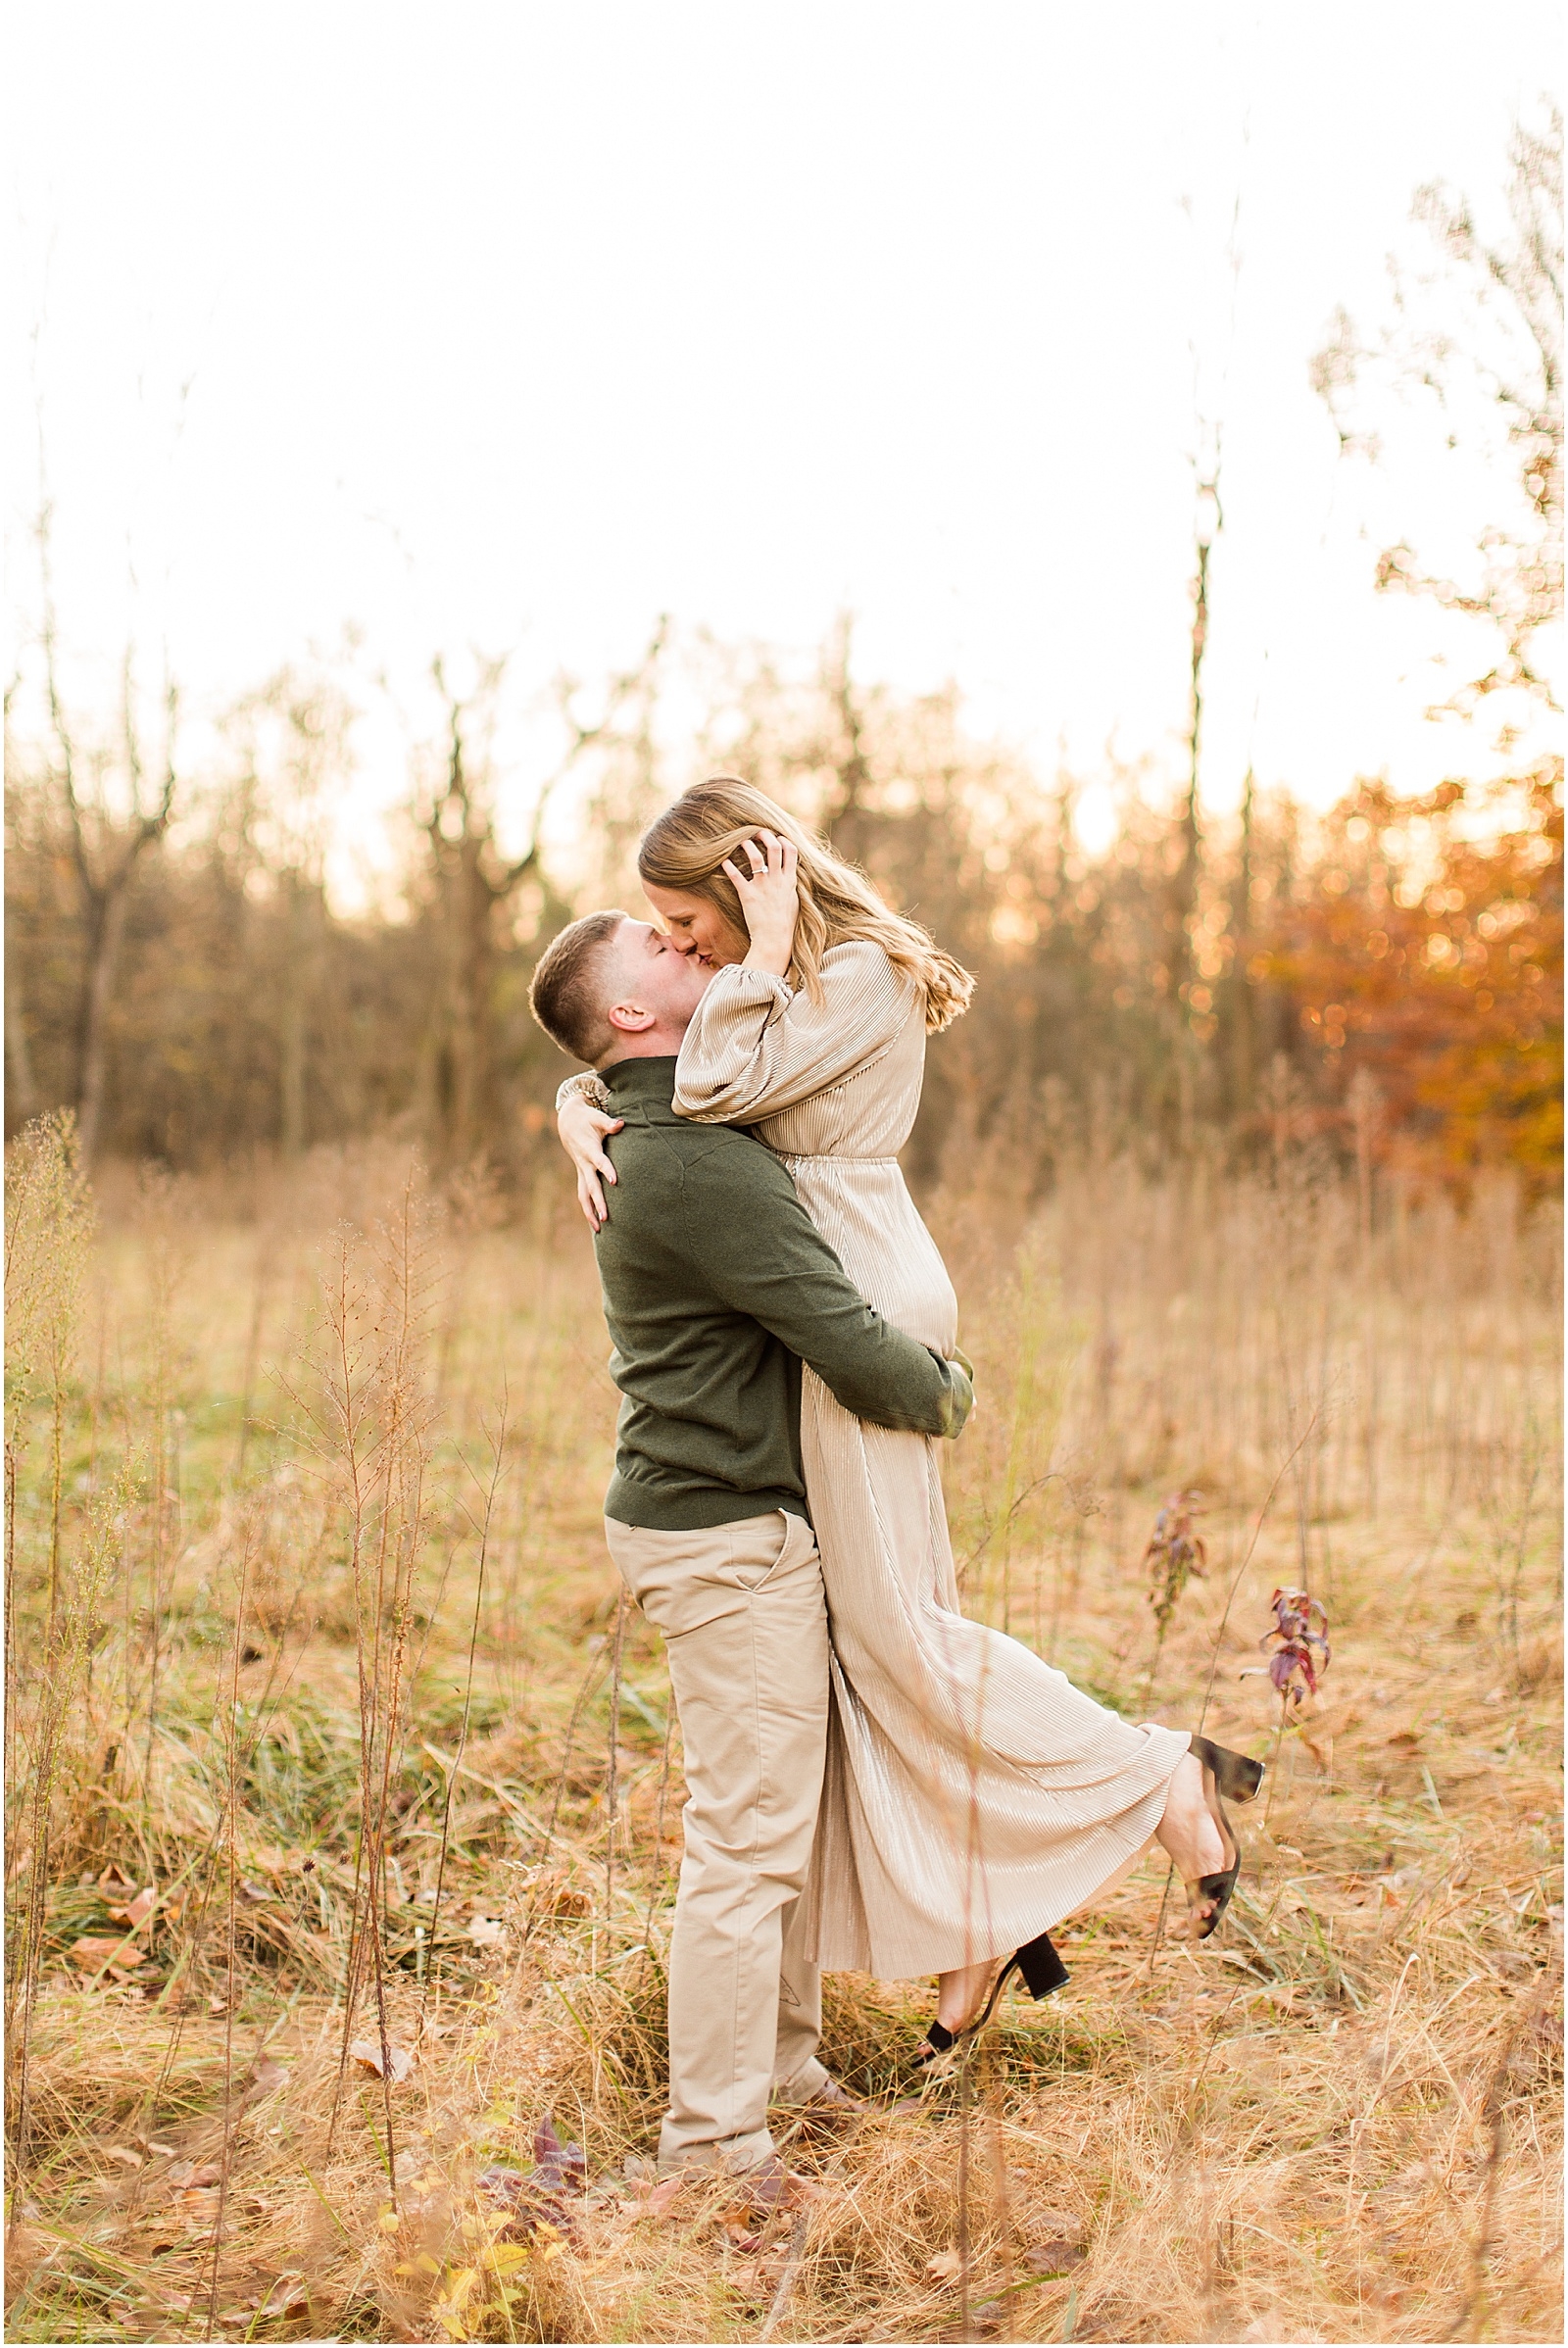 A Fall Southern Indiana Engagement Seesion | Cody and Hannah | Bret and Brandie Photography 054.jpg